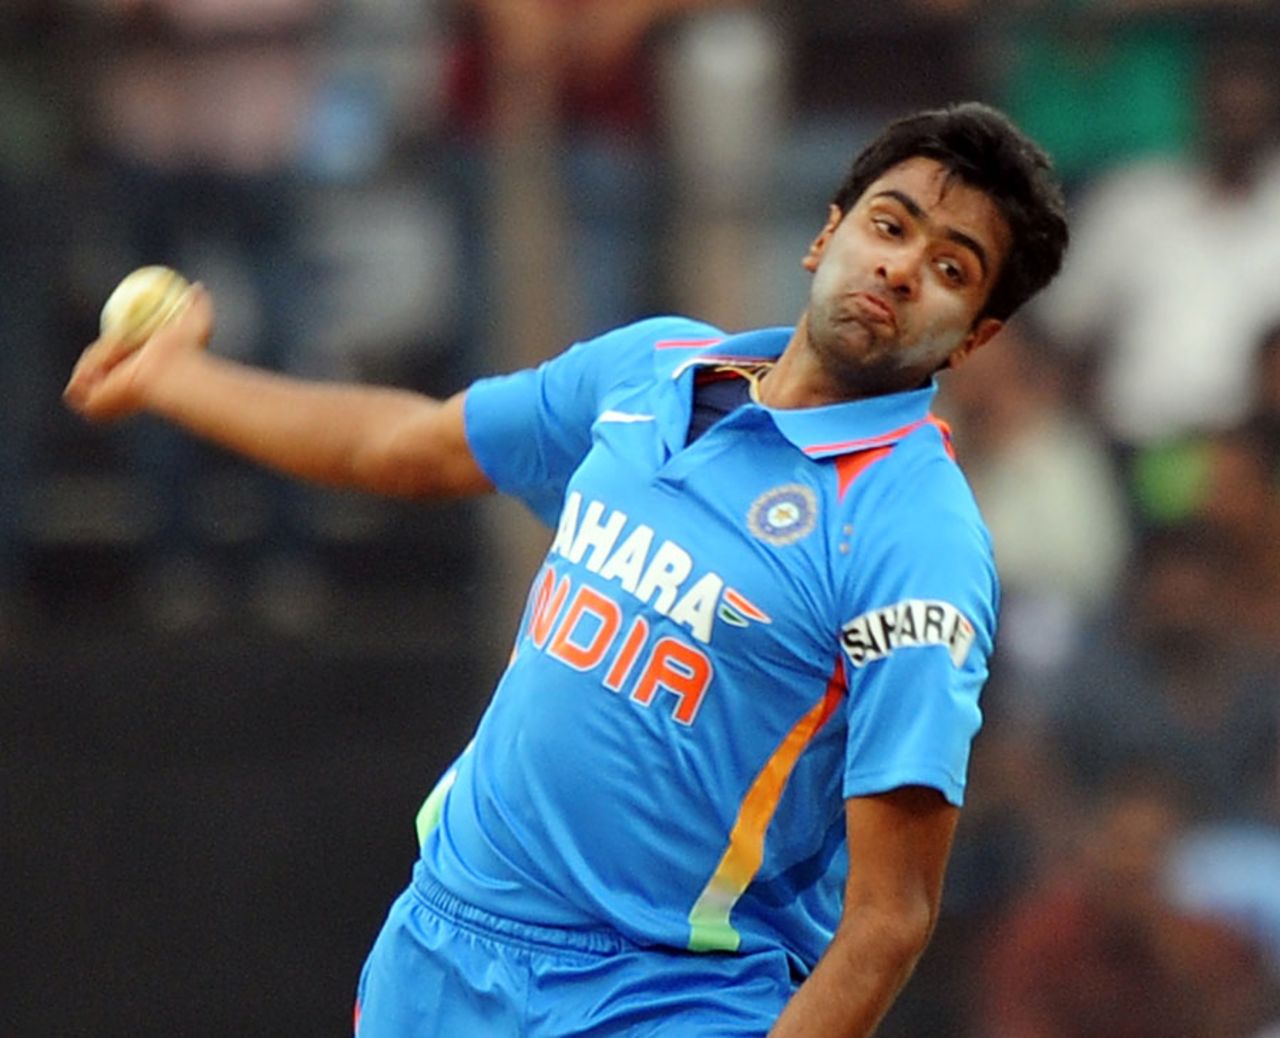 R Ashwin enters his delivery stride, India v New Zealand, 5th ODI, Chennai, December 10, 2010